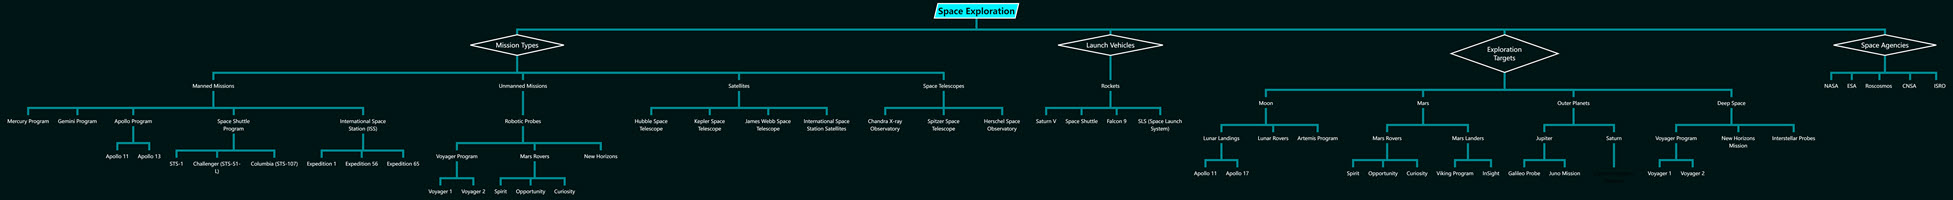 Tree Chart of Space Exploration